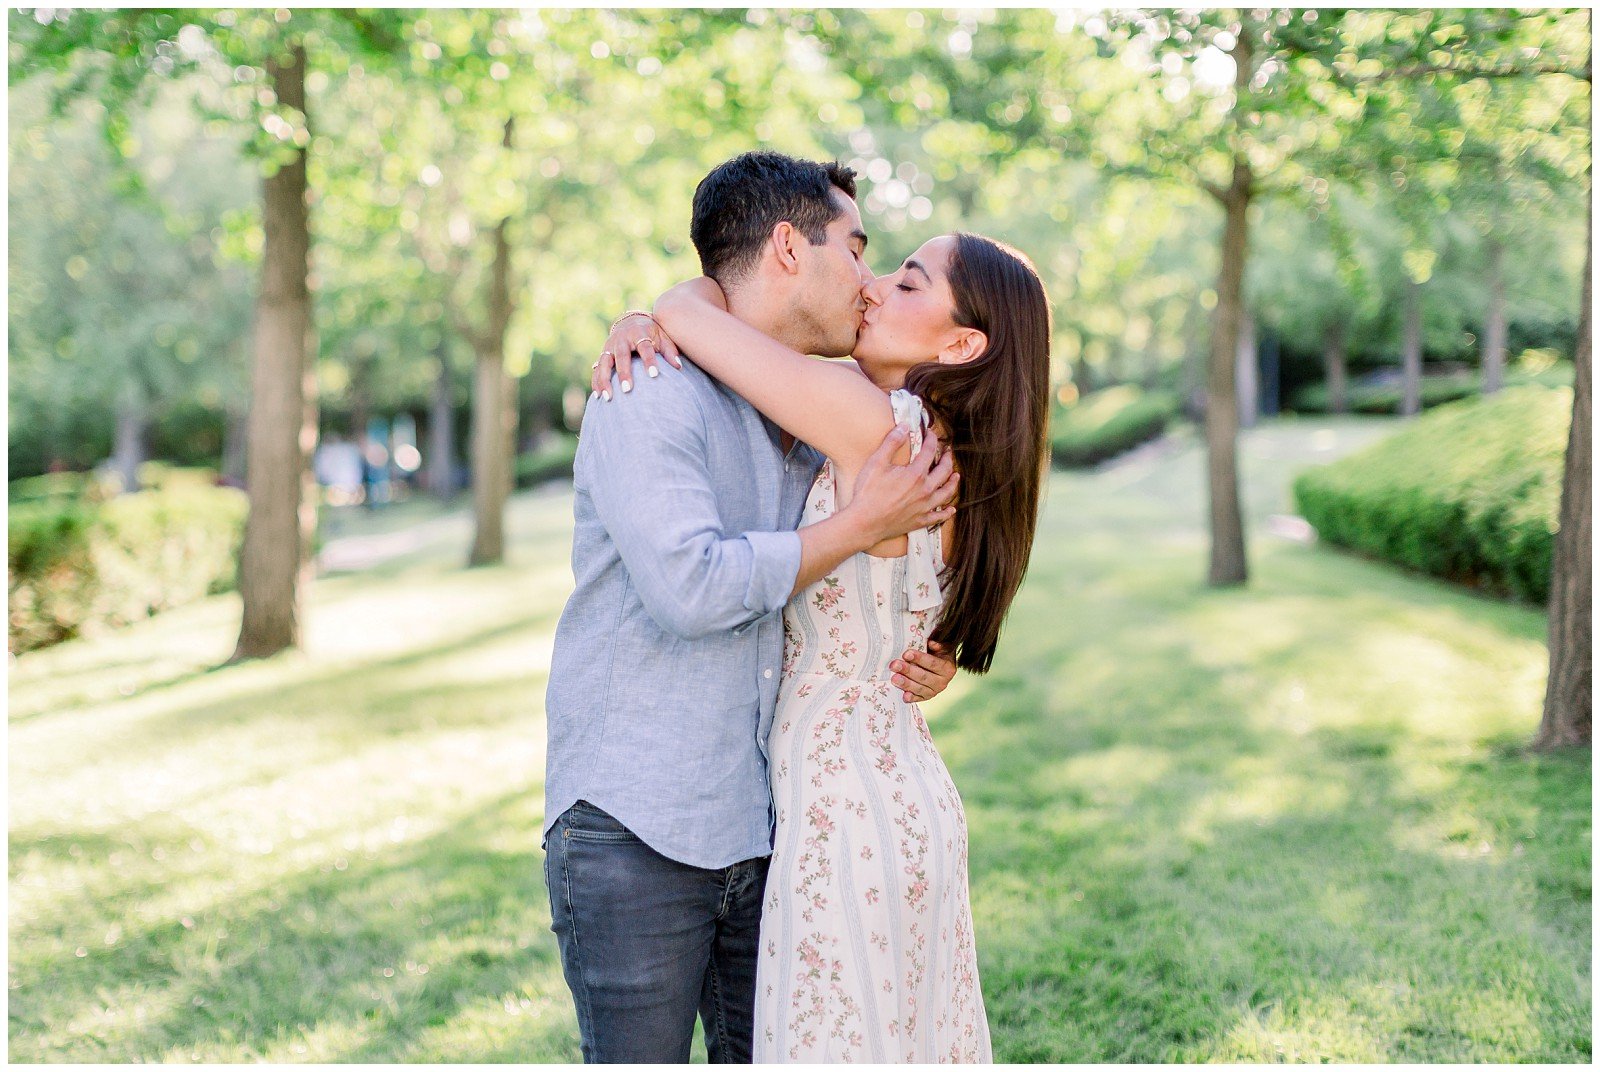 Summer-Engagement-Photos-at-The-Nelson-Atkins-K+S-0522-Elizabeth-Ladean-Photography-photo-_6487.jpg